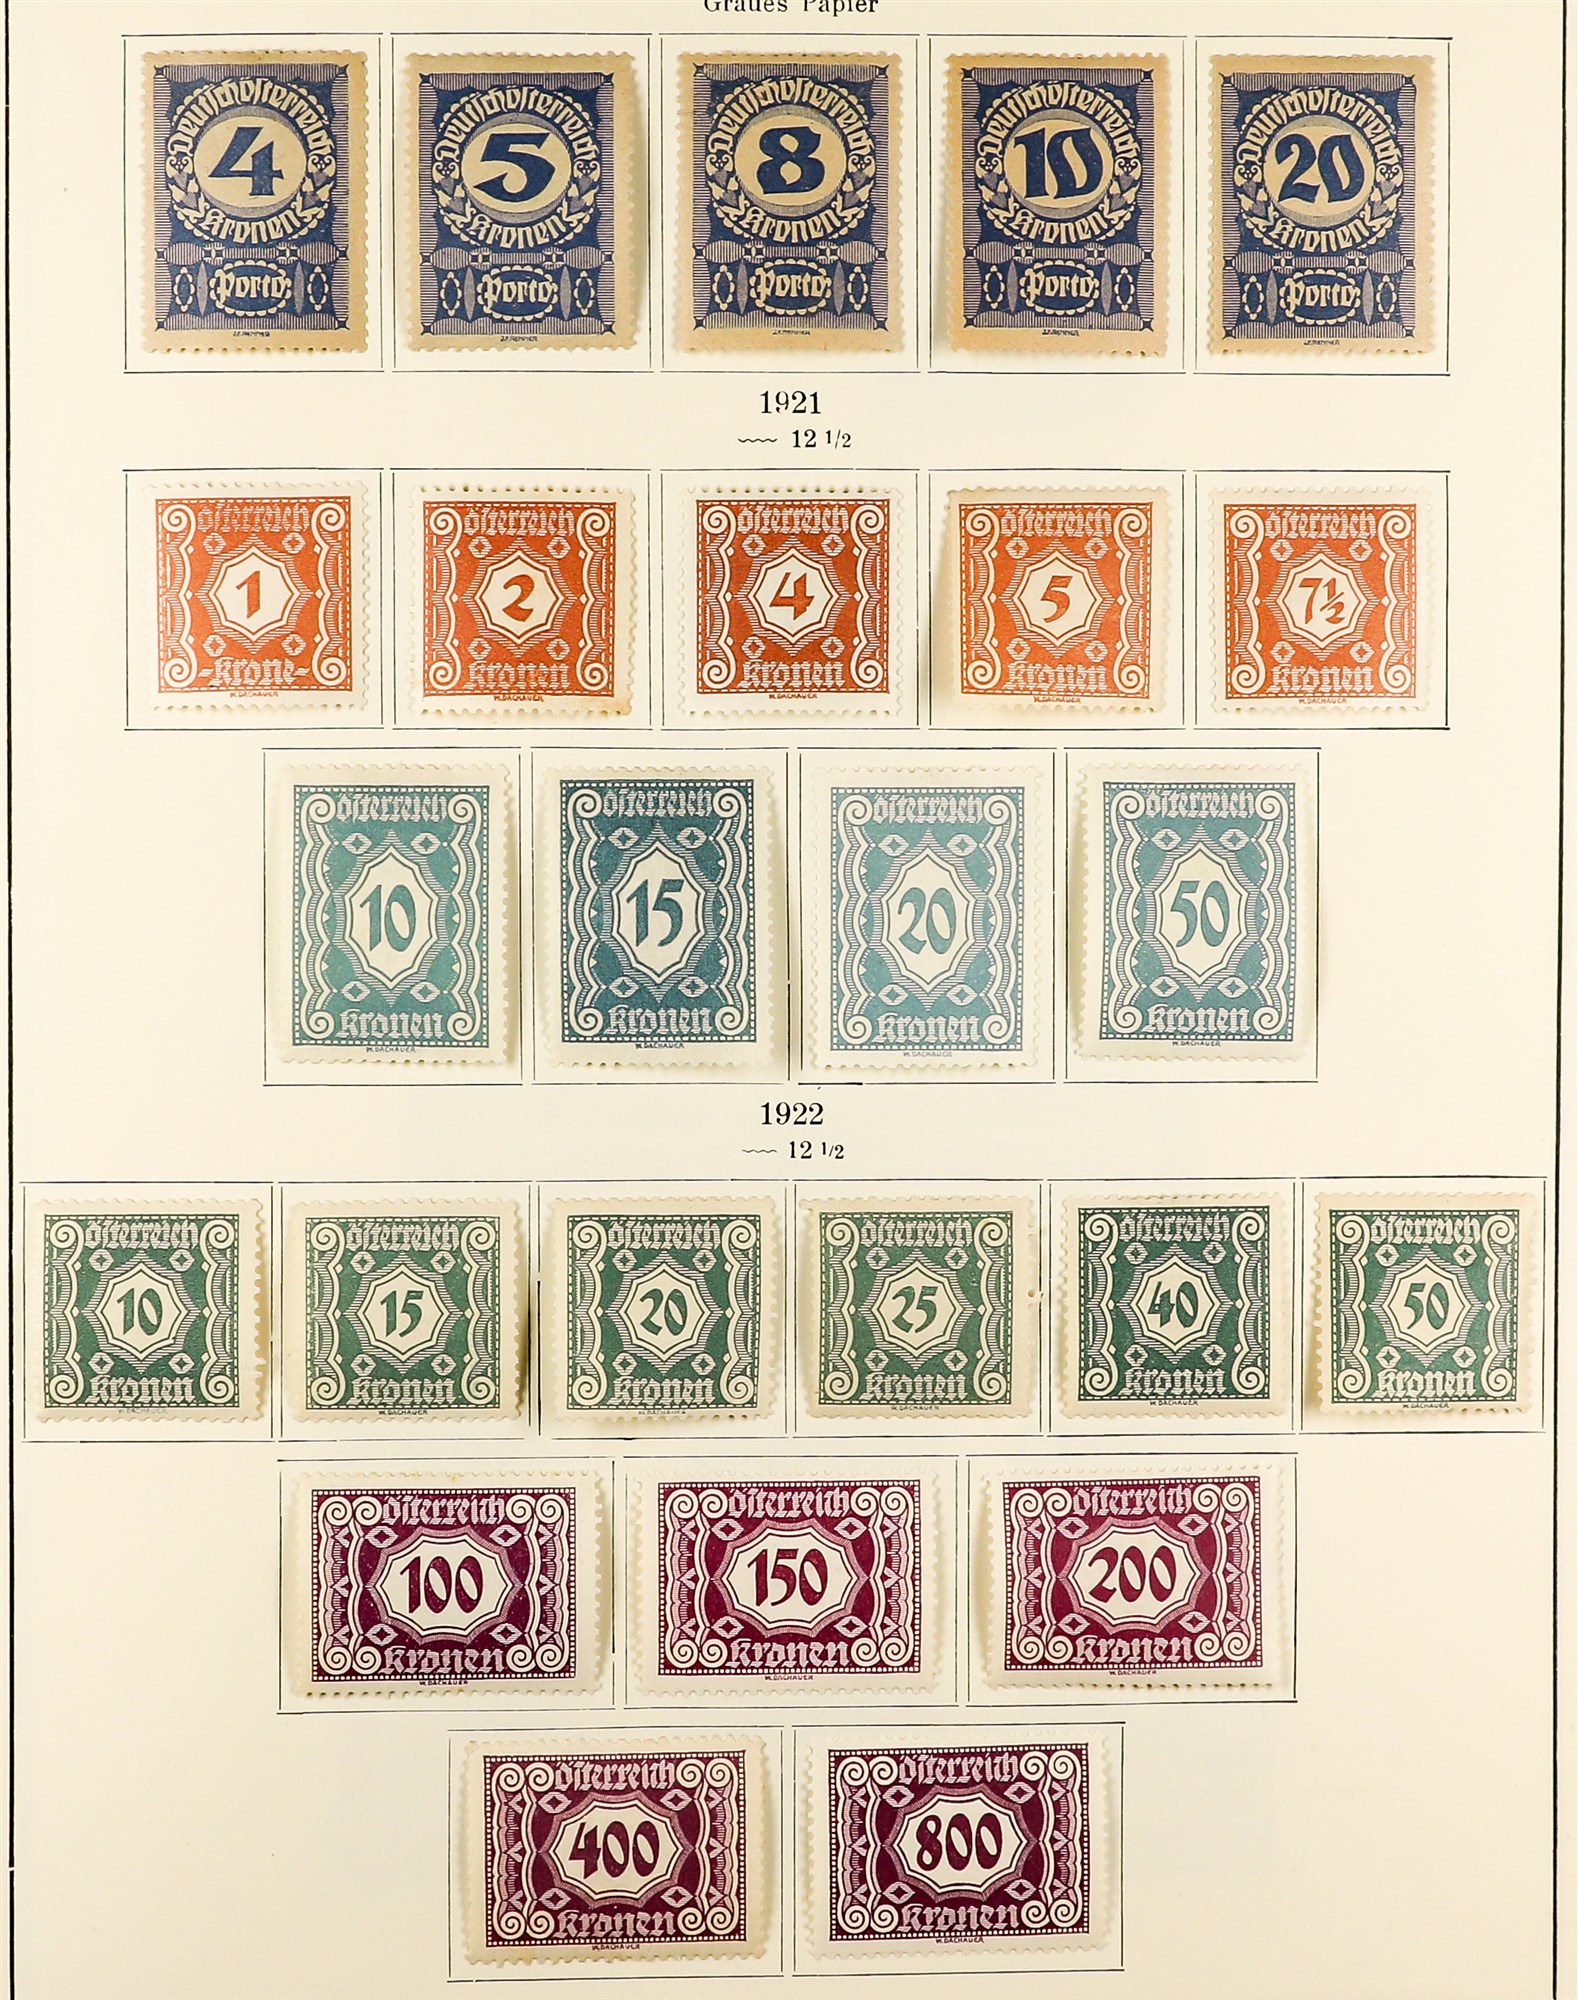 AUSTRIA 1918 - 1937 REPUBLIC COLLECTION of chiefly mint / never hinged mint sets in album incl - Image 11 of 22